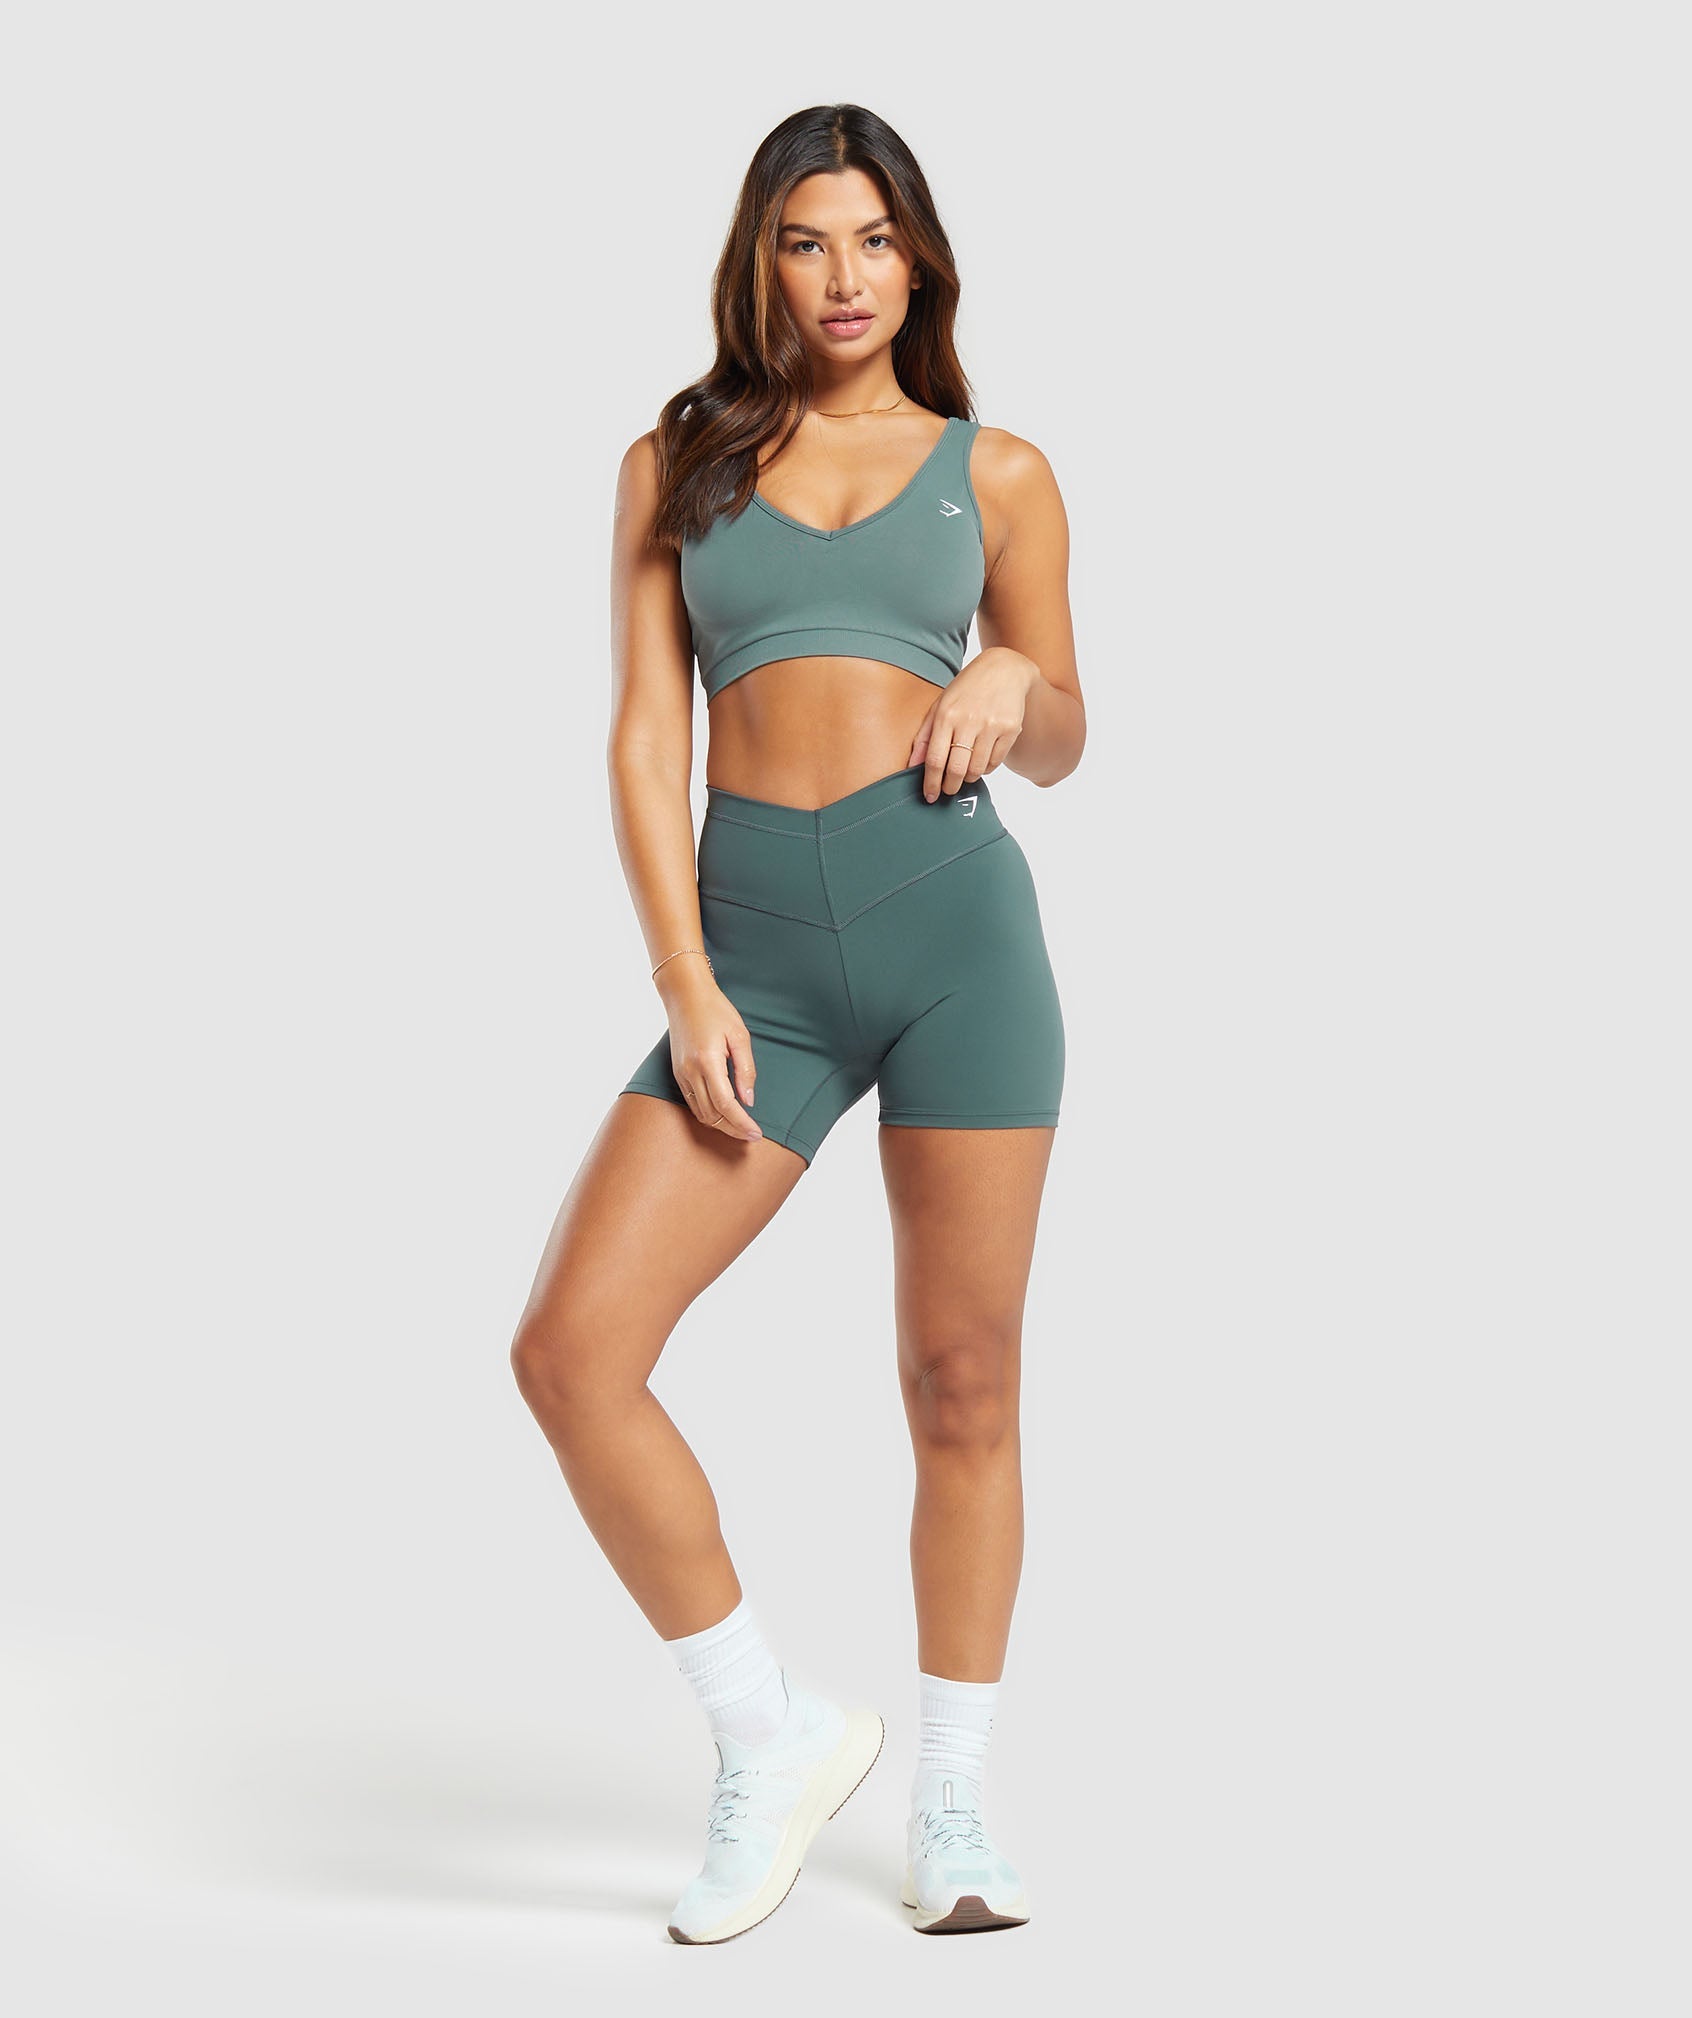 Everyday Seamless Sports Bra in Cargo Teal - view 4